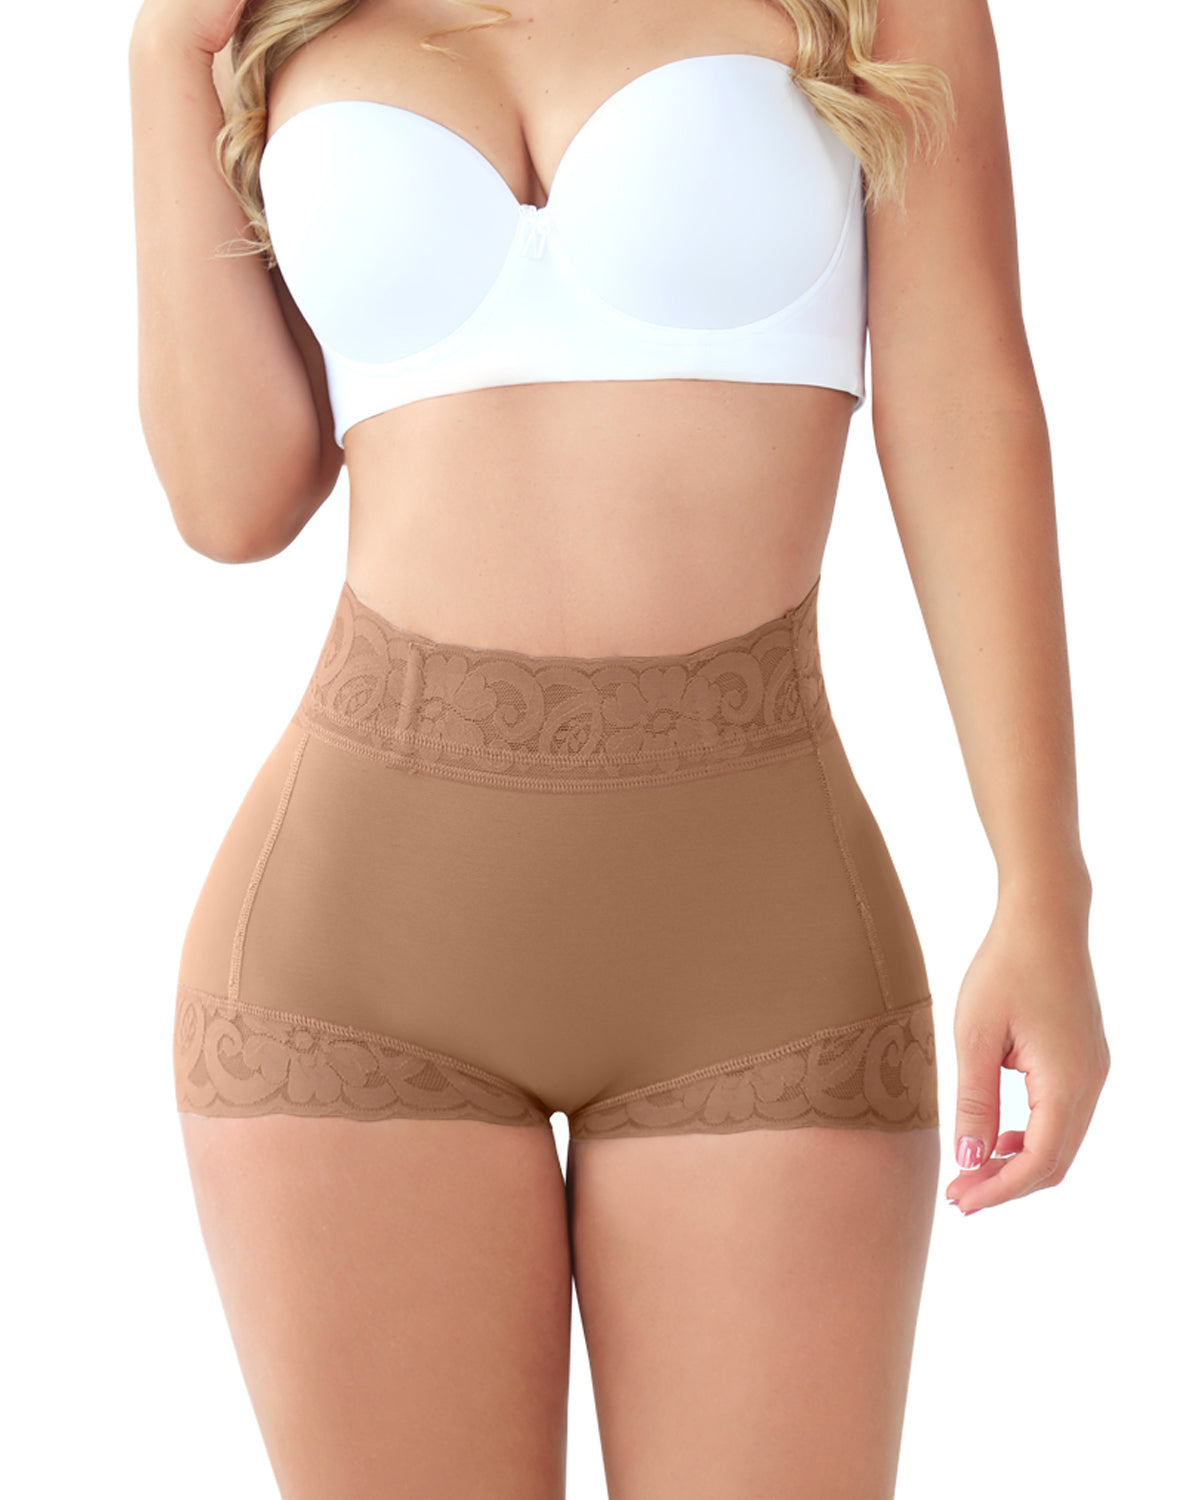 Women Lace Underwear Butt Lifter Shapewear with Filler Postpartum High  Waist Tummy Control Body Shaper Shorts Shaping Panties at  Women's  Clothing store